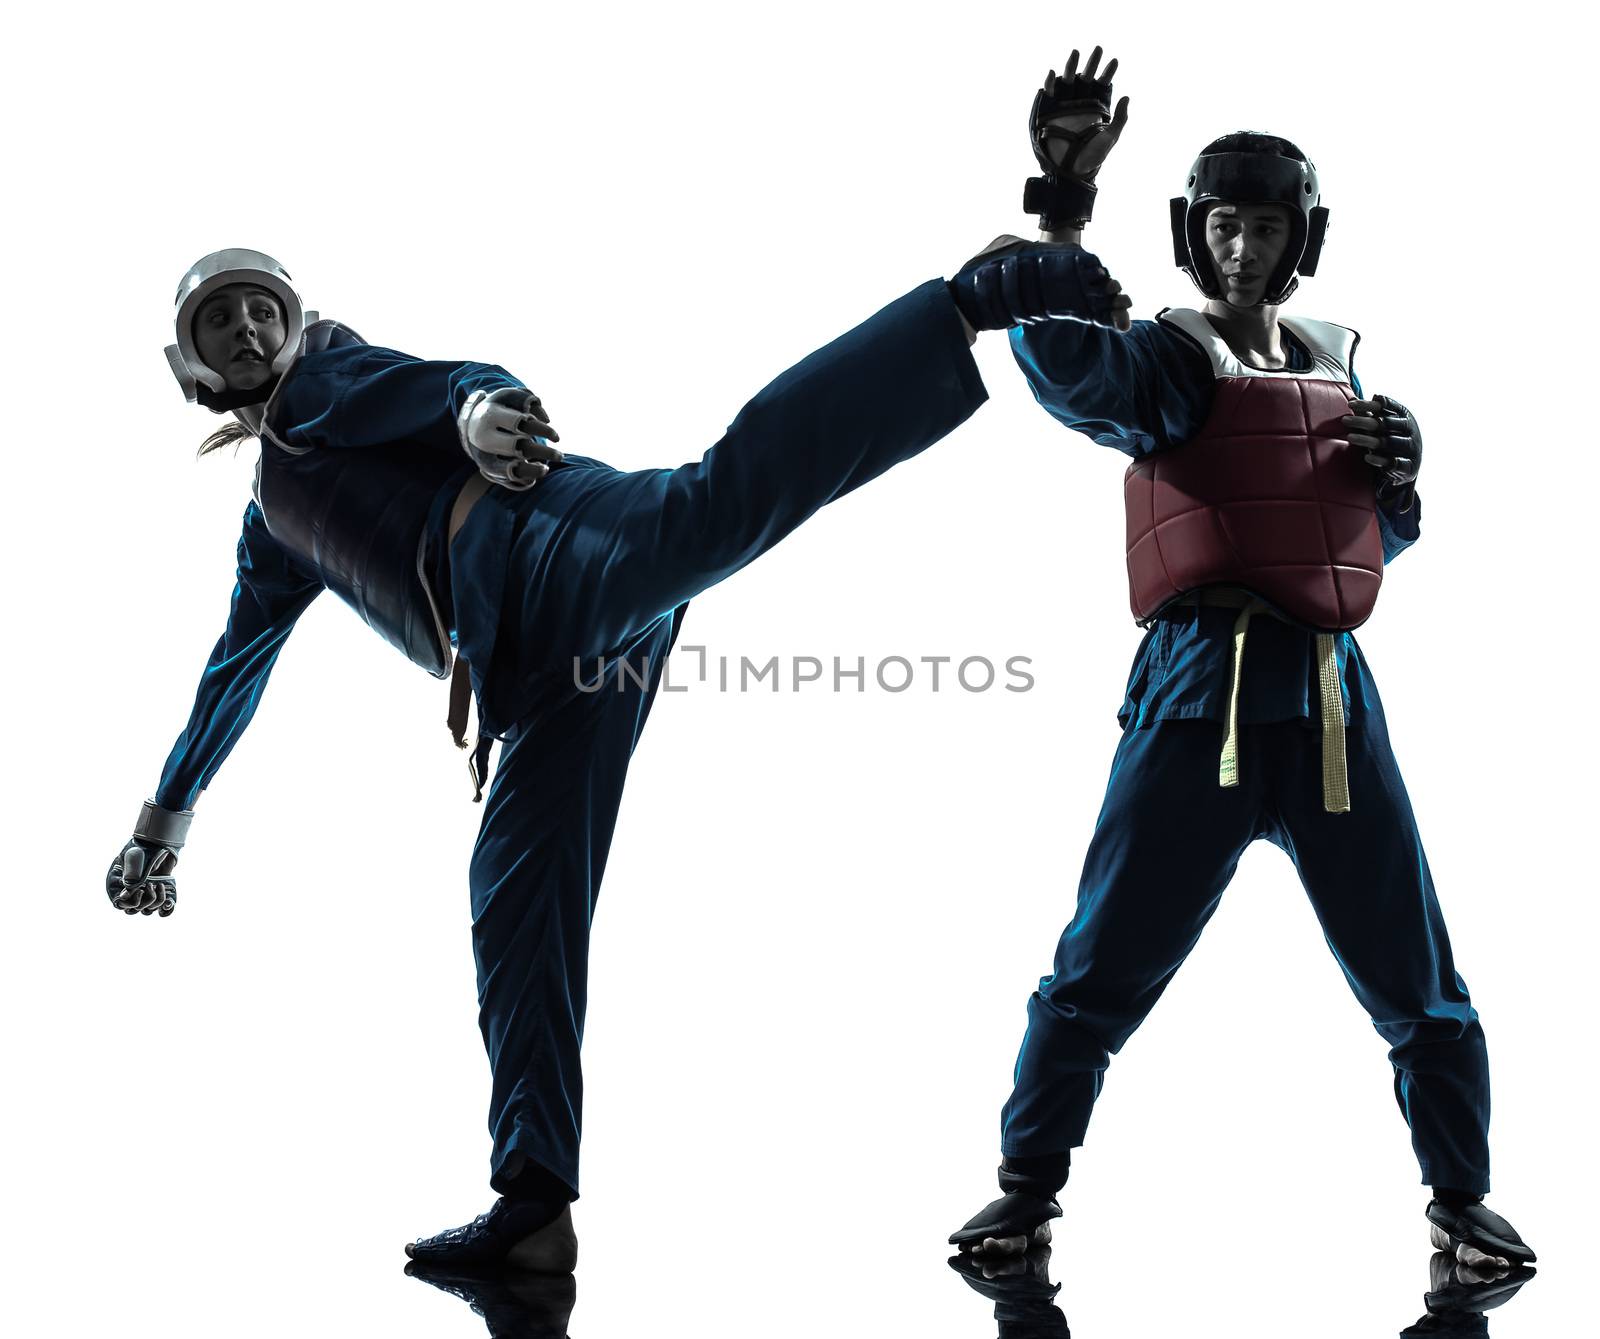 one caucasian man exercising martial arts in silhouette studio isolated on white background